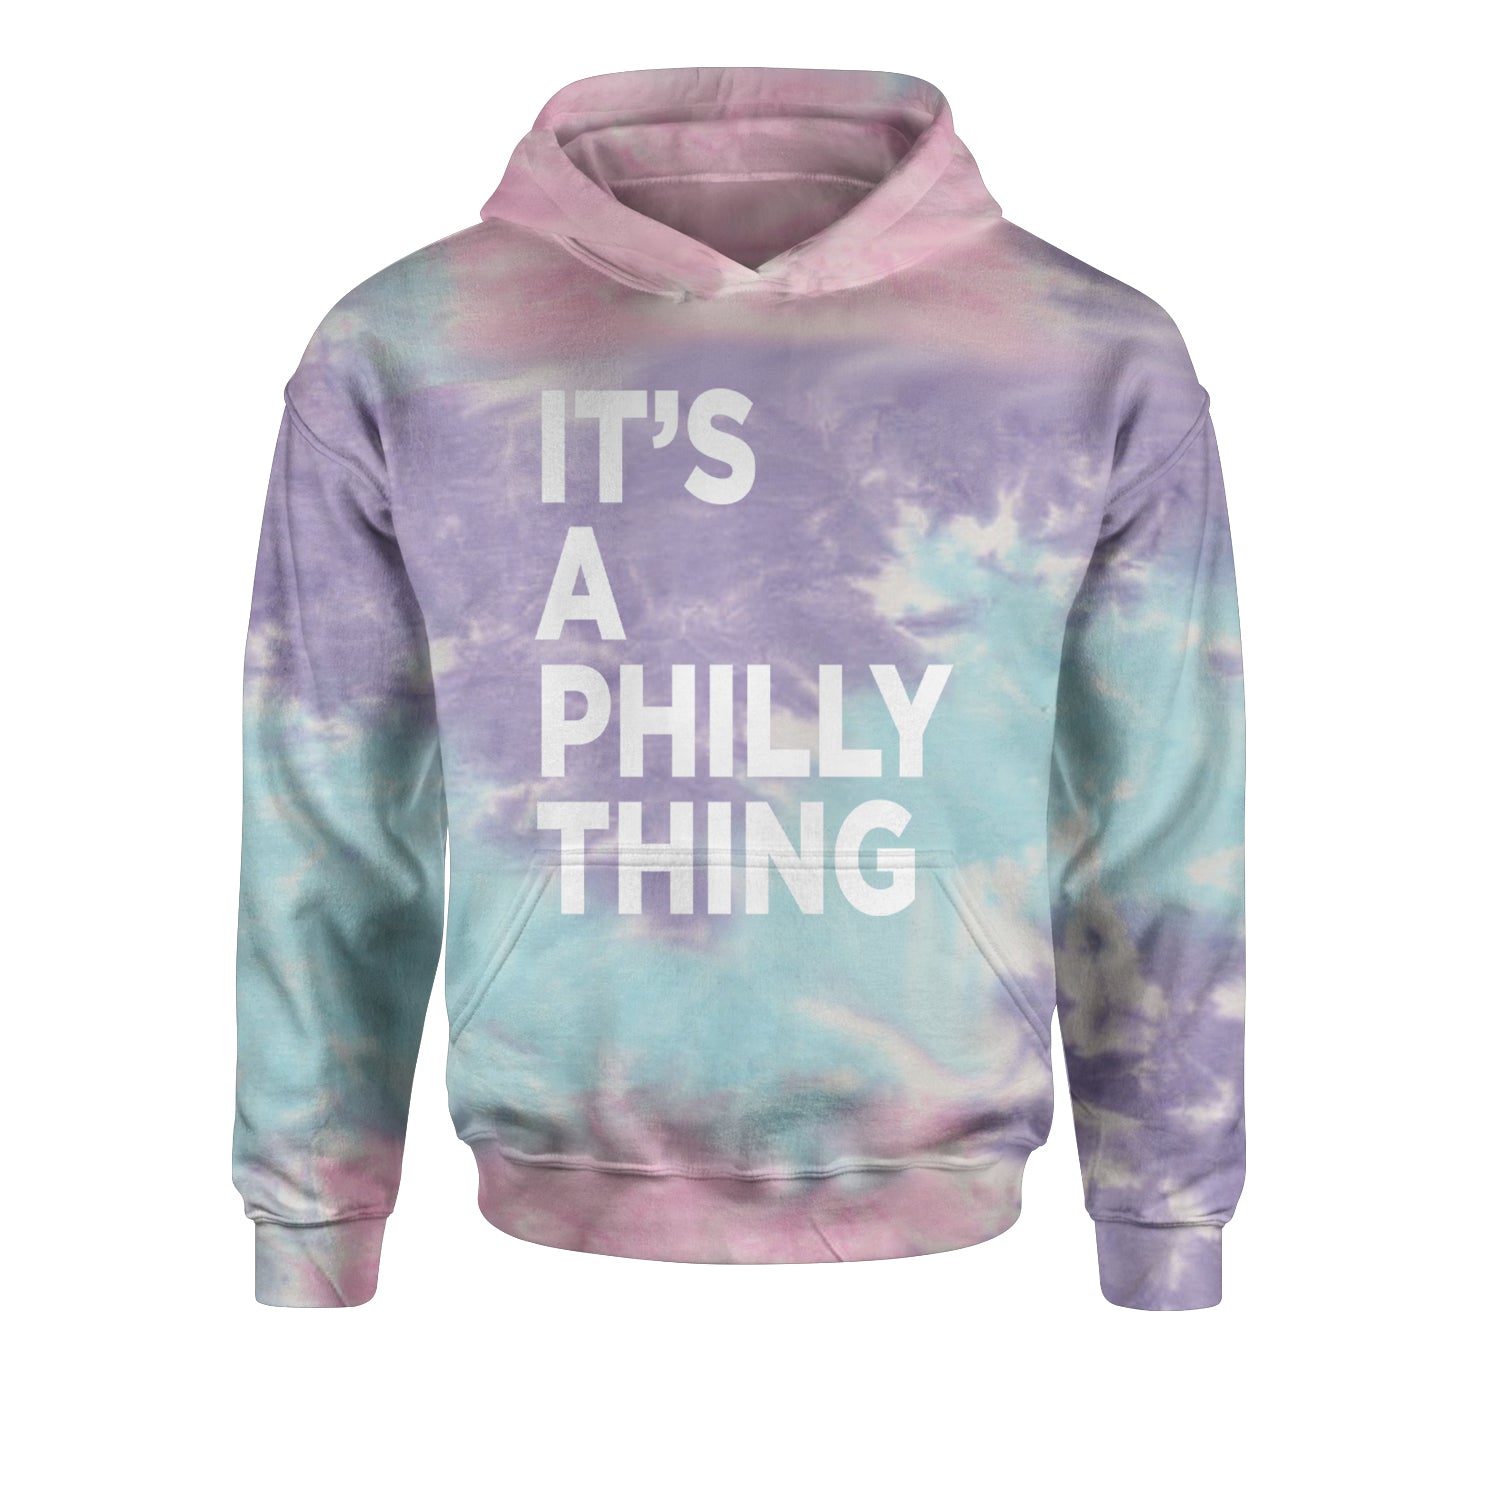 PHILLY It's A Philly Thing Youth-Sized Hoodie baseball, dilly, filly, football, jawn, morgan, Philadelphia, philli by Expression Tees